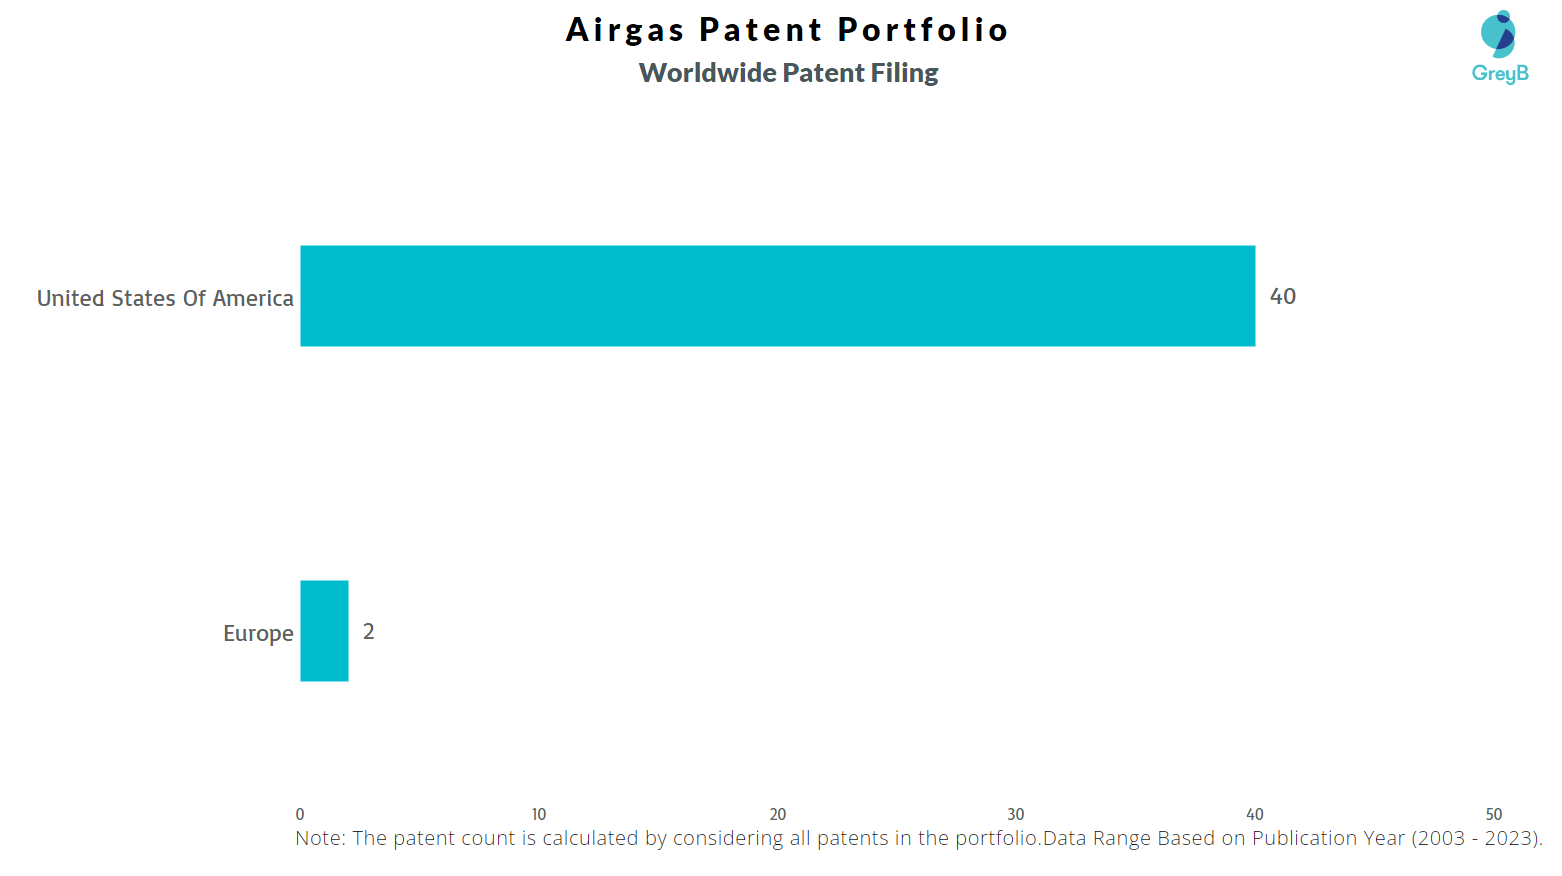 Airgas Worldwide Patent Filing